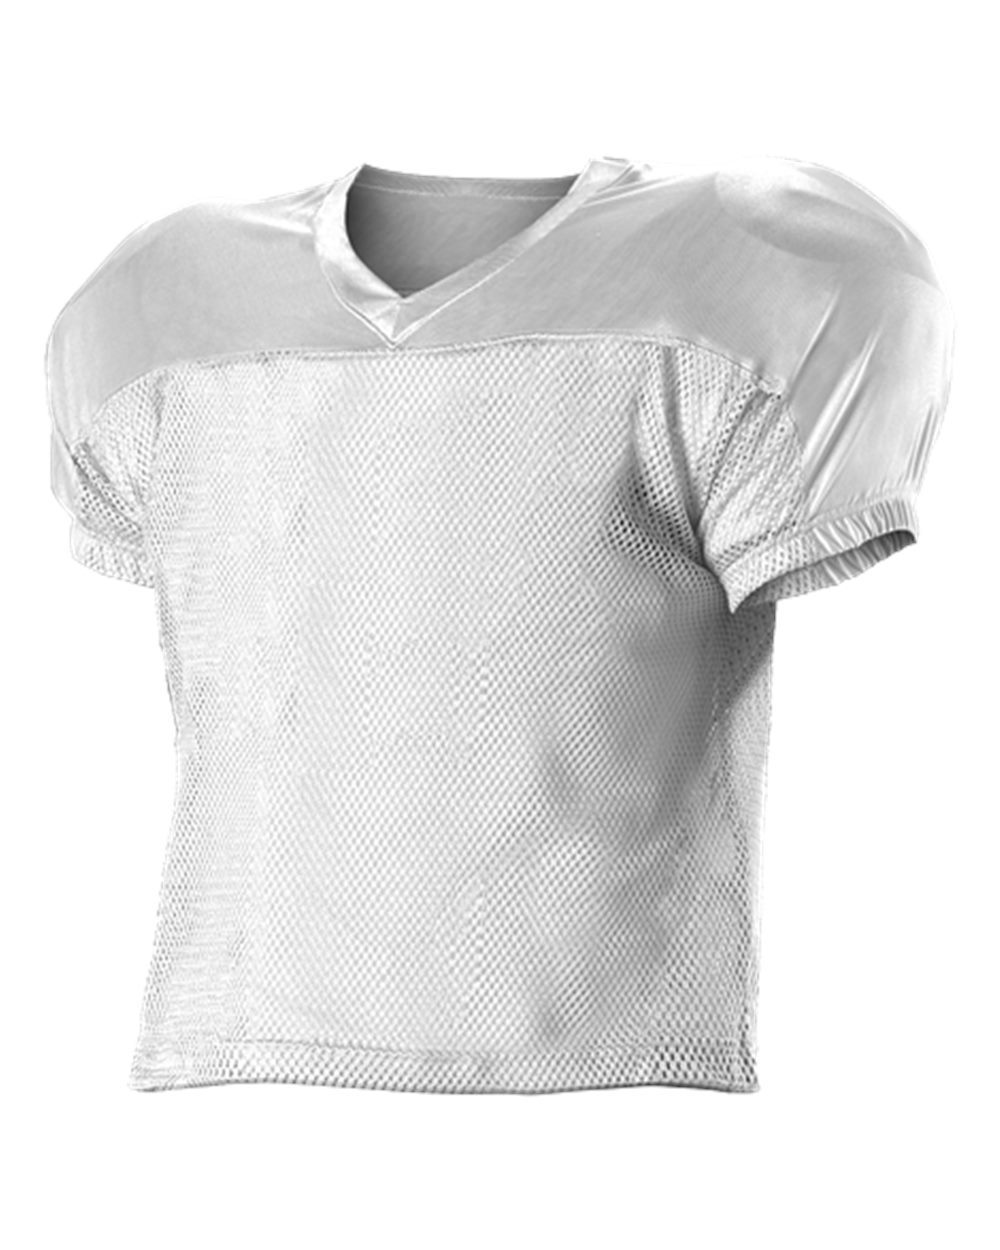 A4 NB4260 - Youth Drills Polyester Mesh Practice Jersey White - S/M